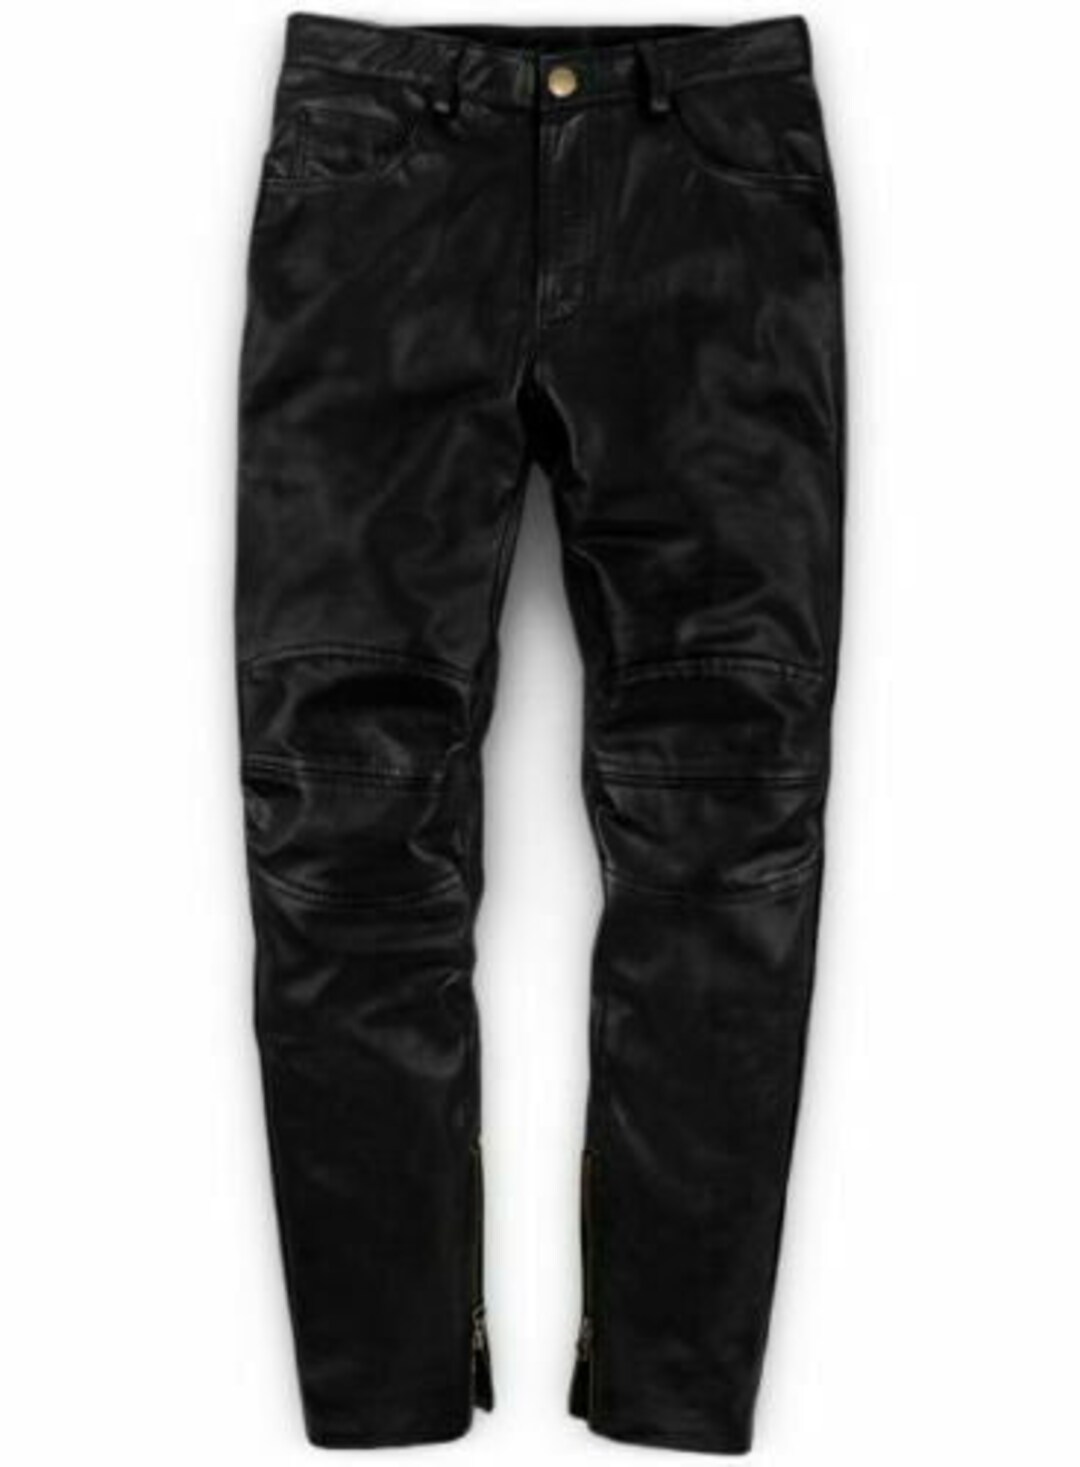 Men's Leather Pants Stylish Leather Outfits Motorcycle Biker Slim Fit ...